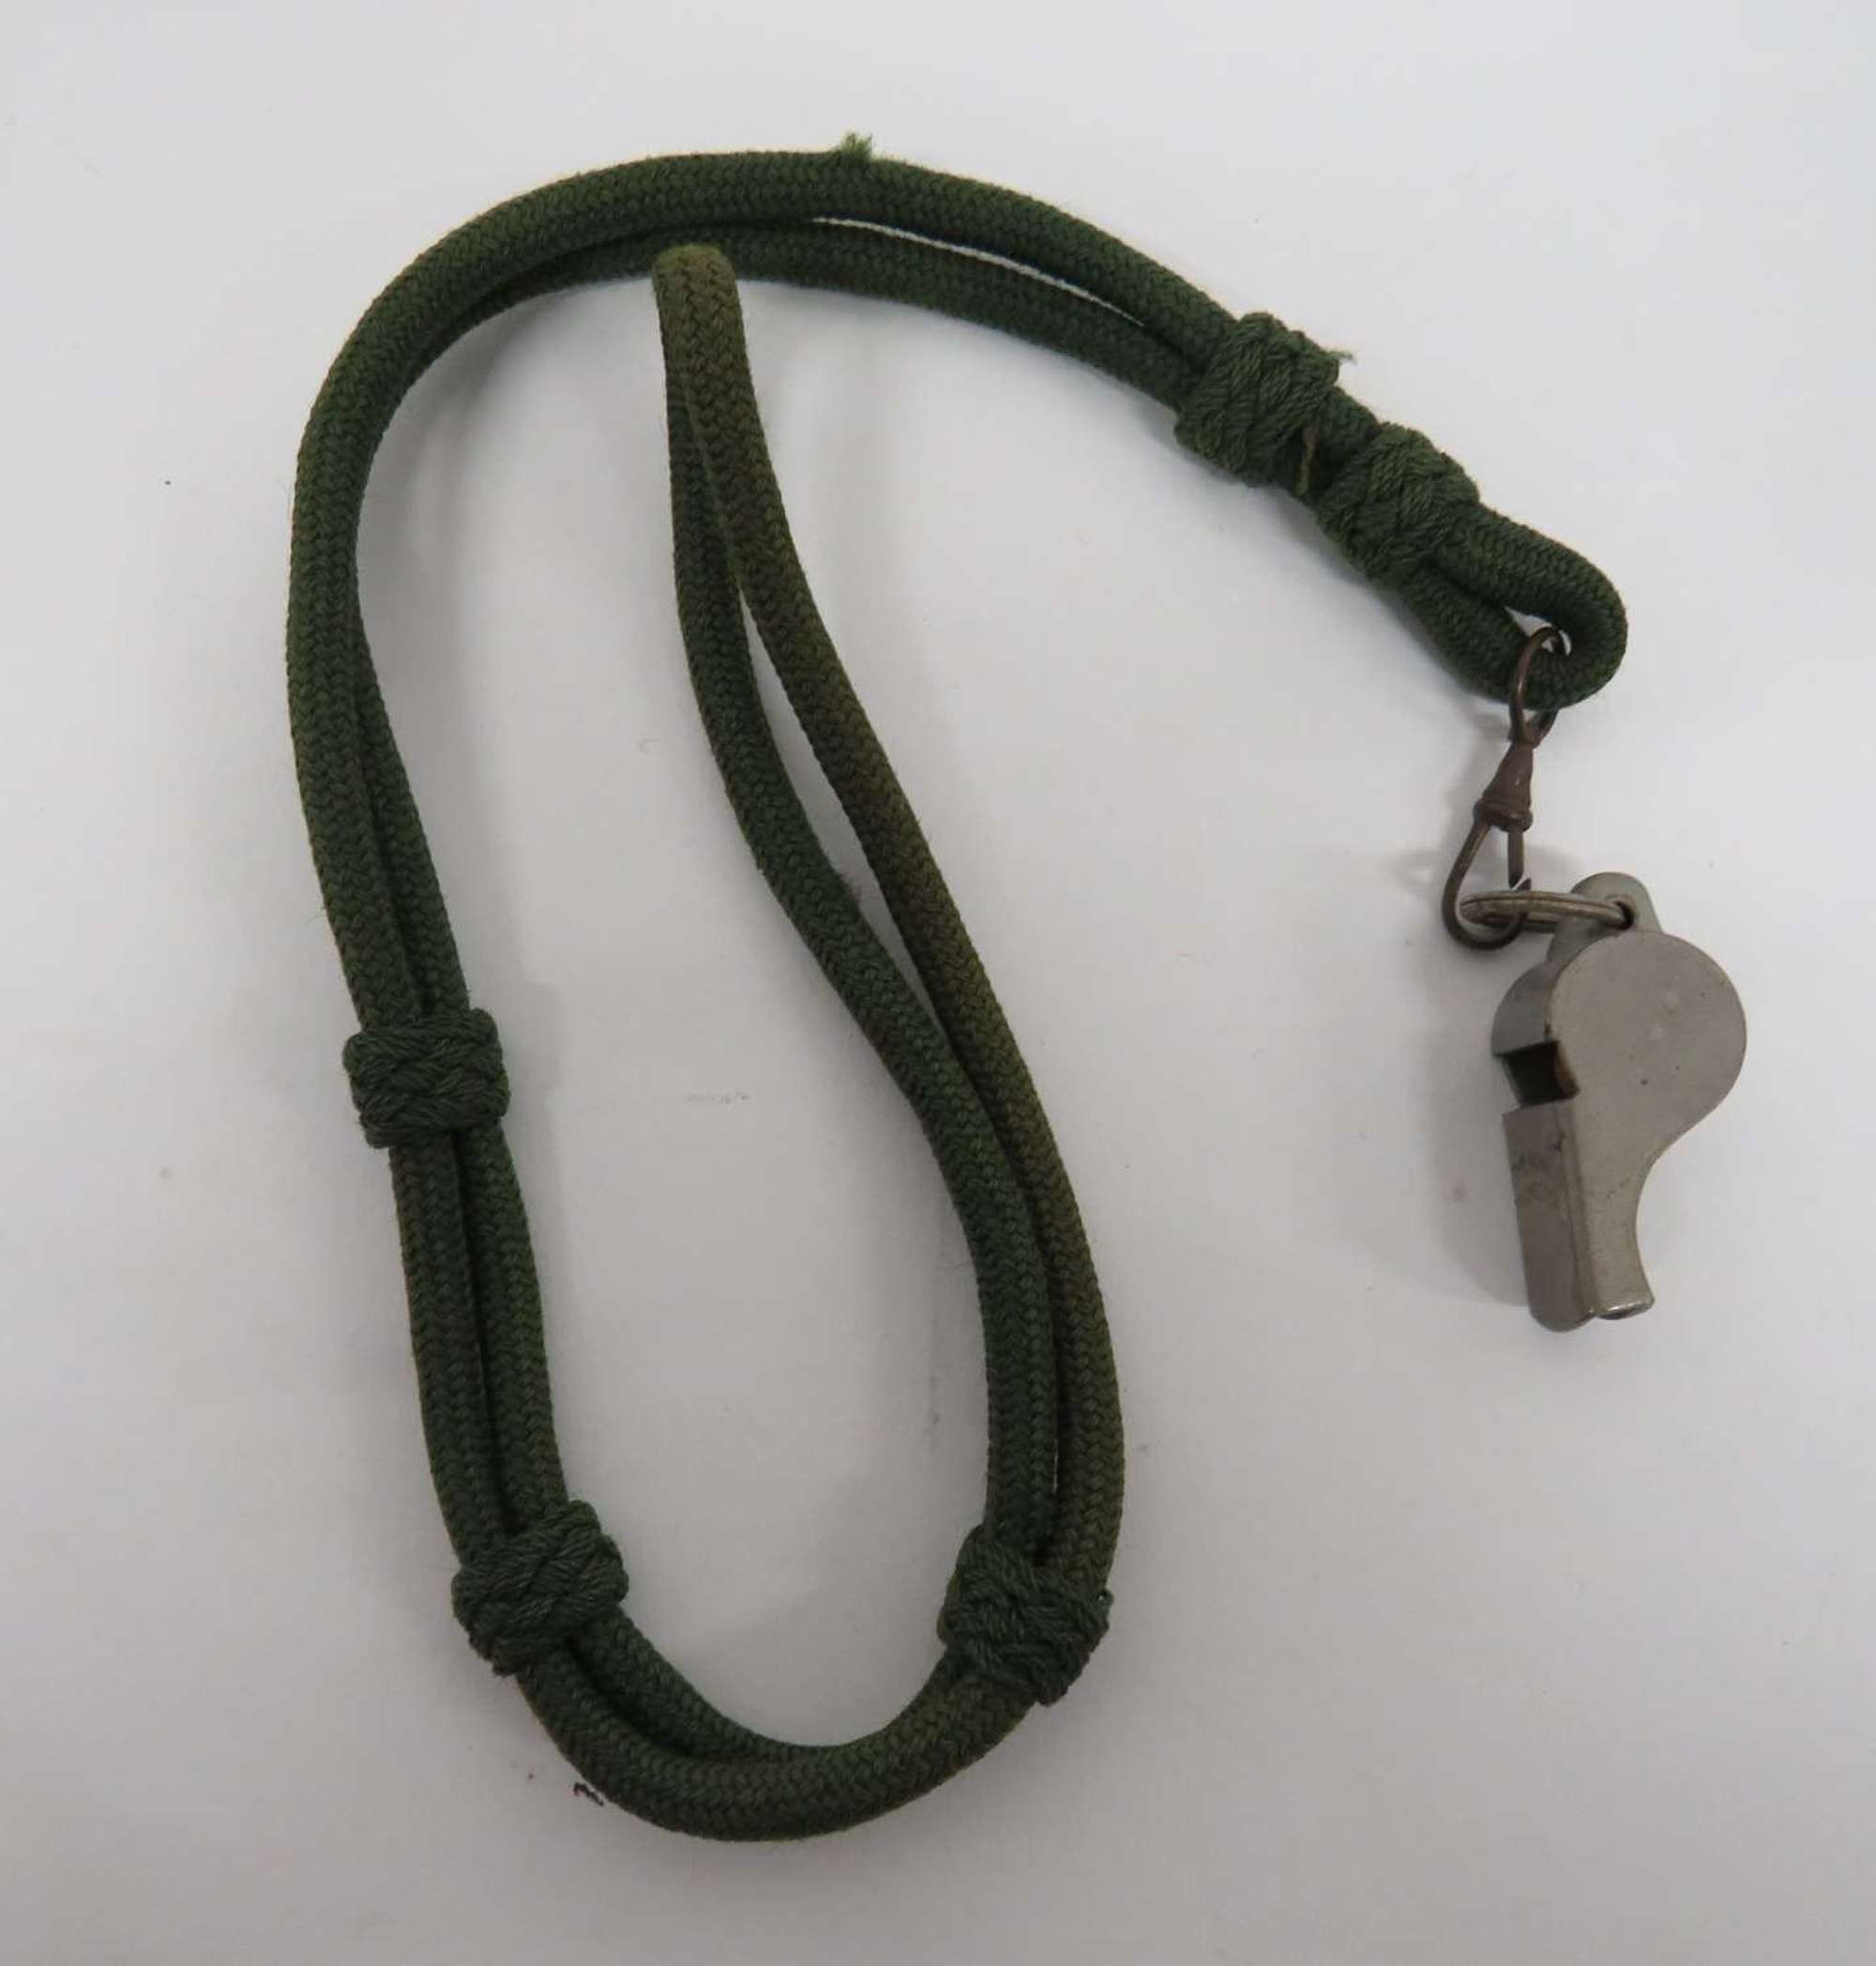 Rifles Officers Lanyard and Whistle